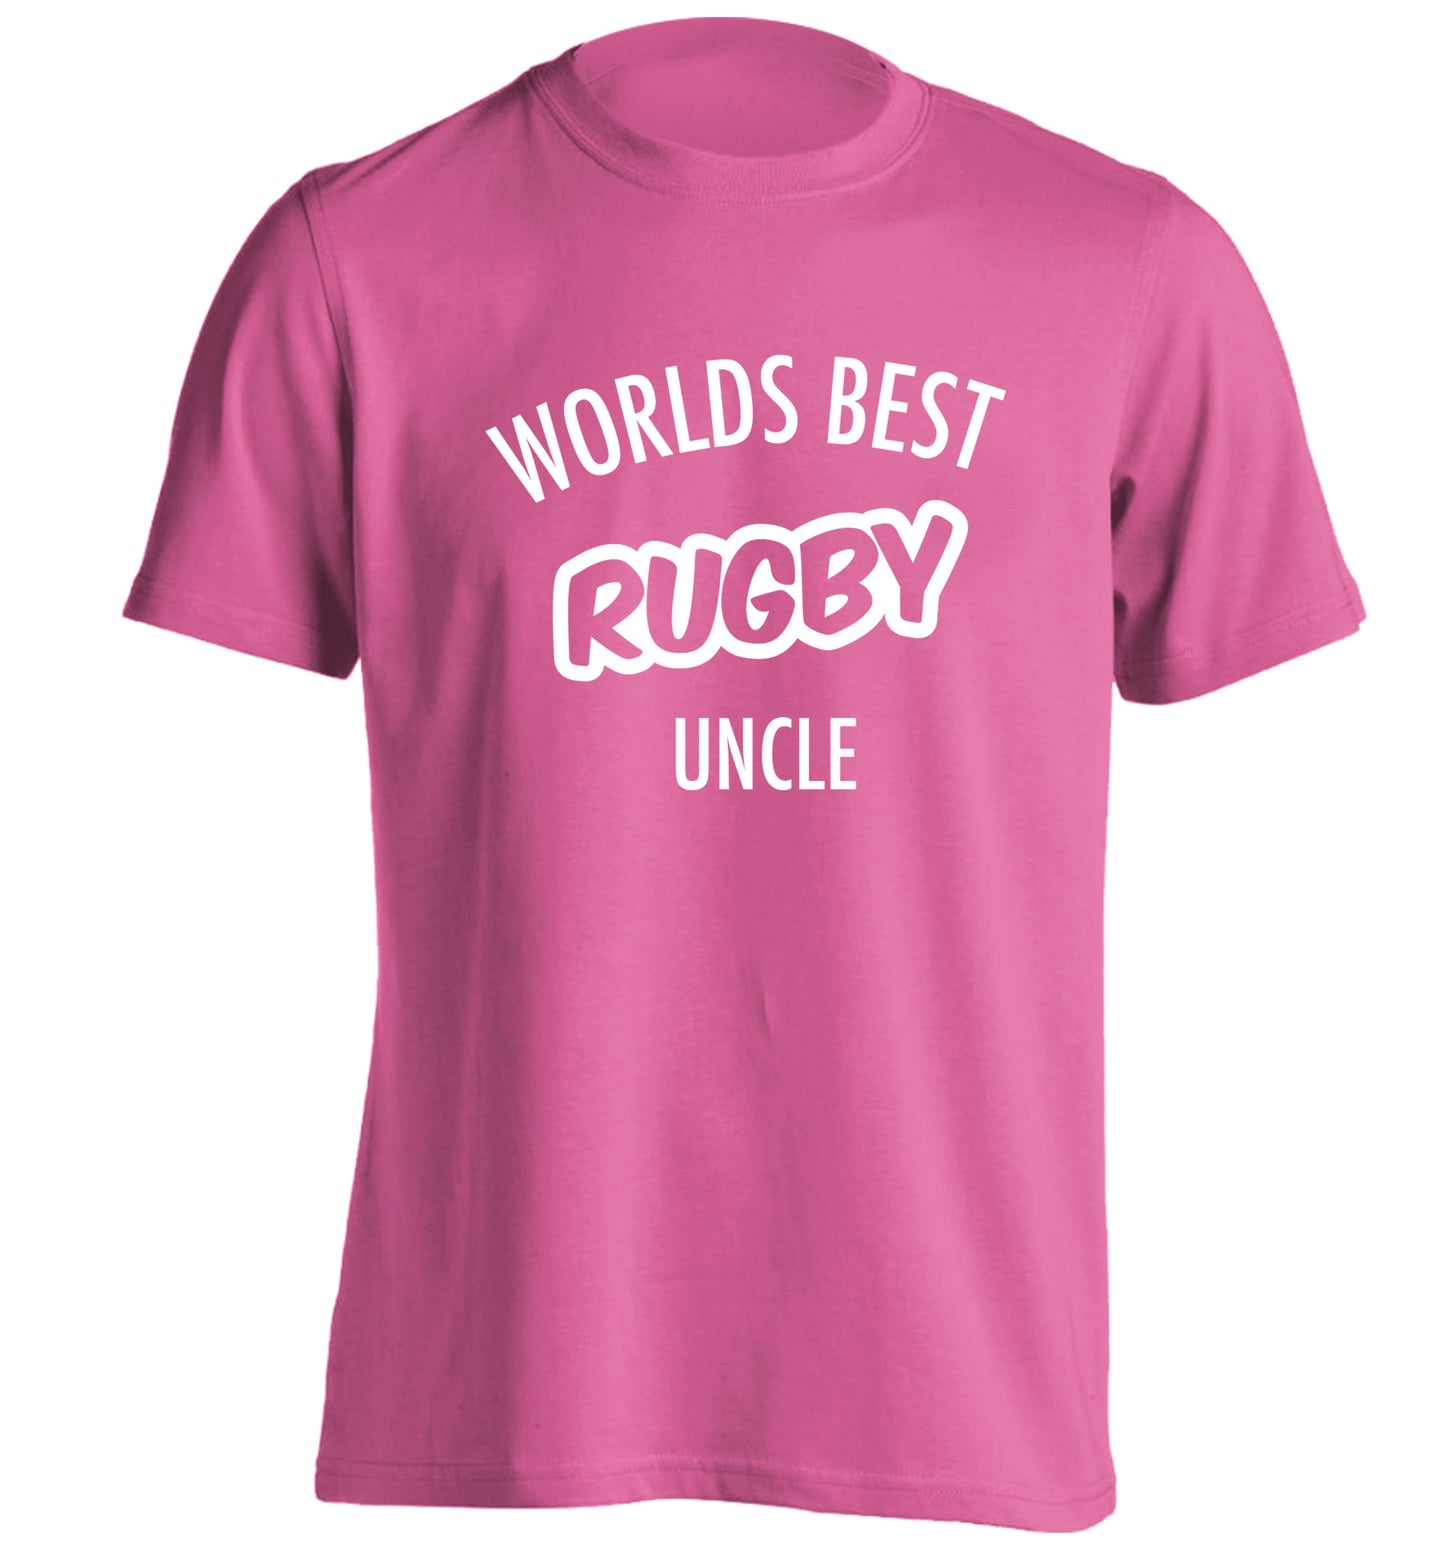 Worlds best rugby uncle adults unisex pink Tshirt 2XL